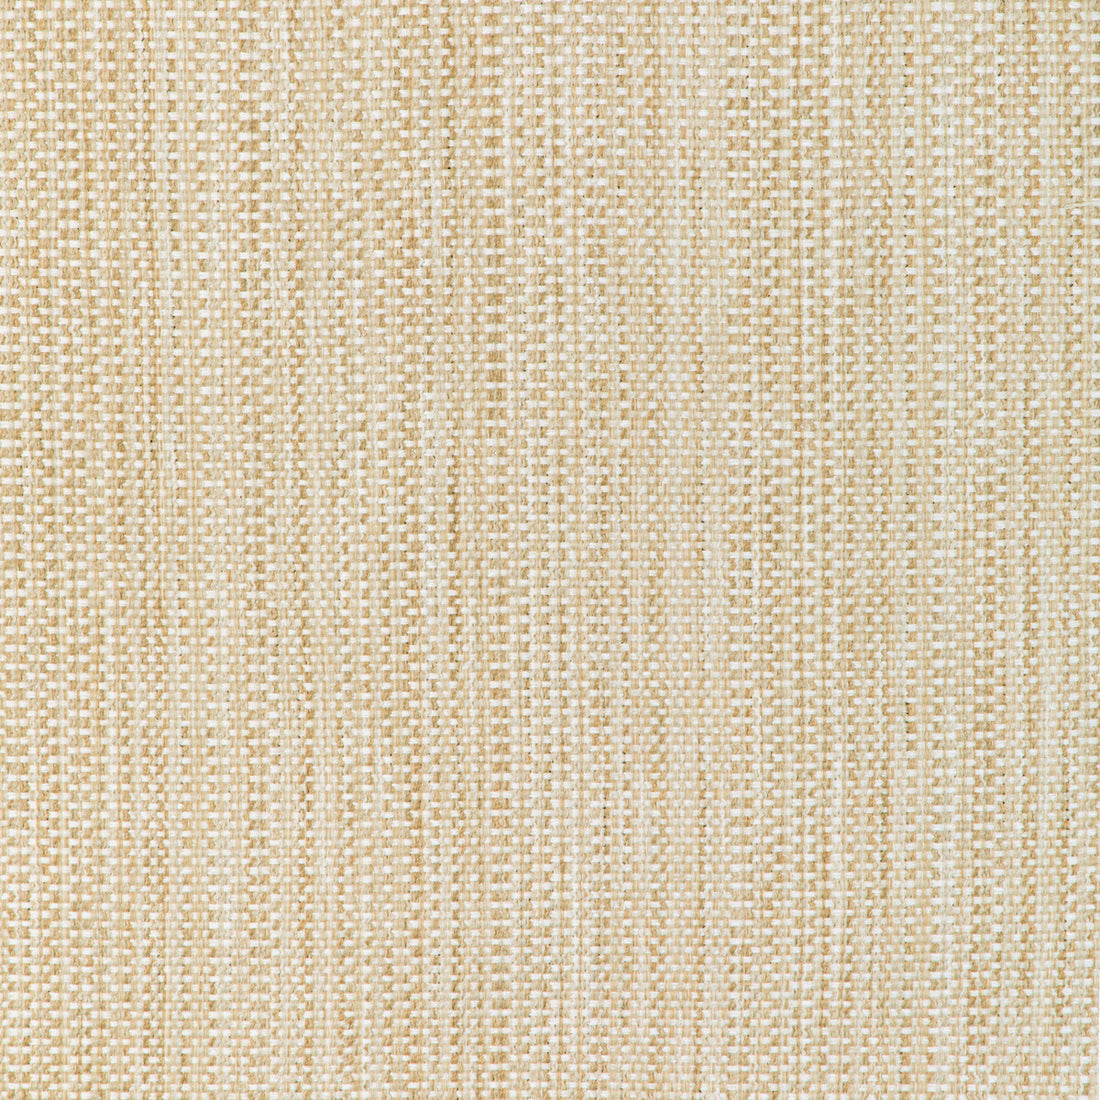 Kravet Smart fabric in 37018-116 color - pattern 37018.116.0 - by Kravet Smart in the Gis collection